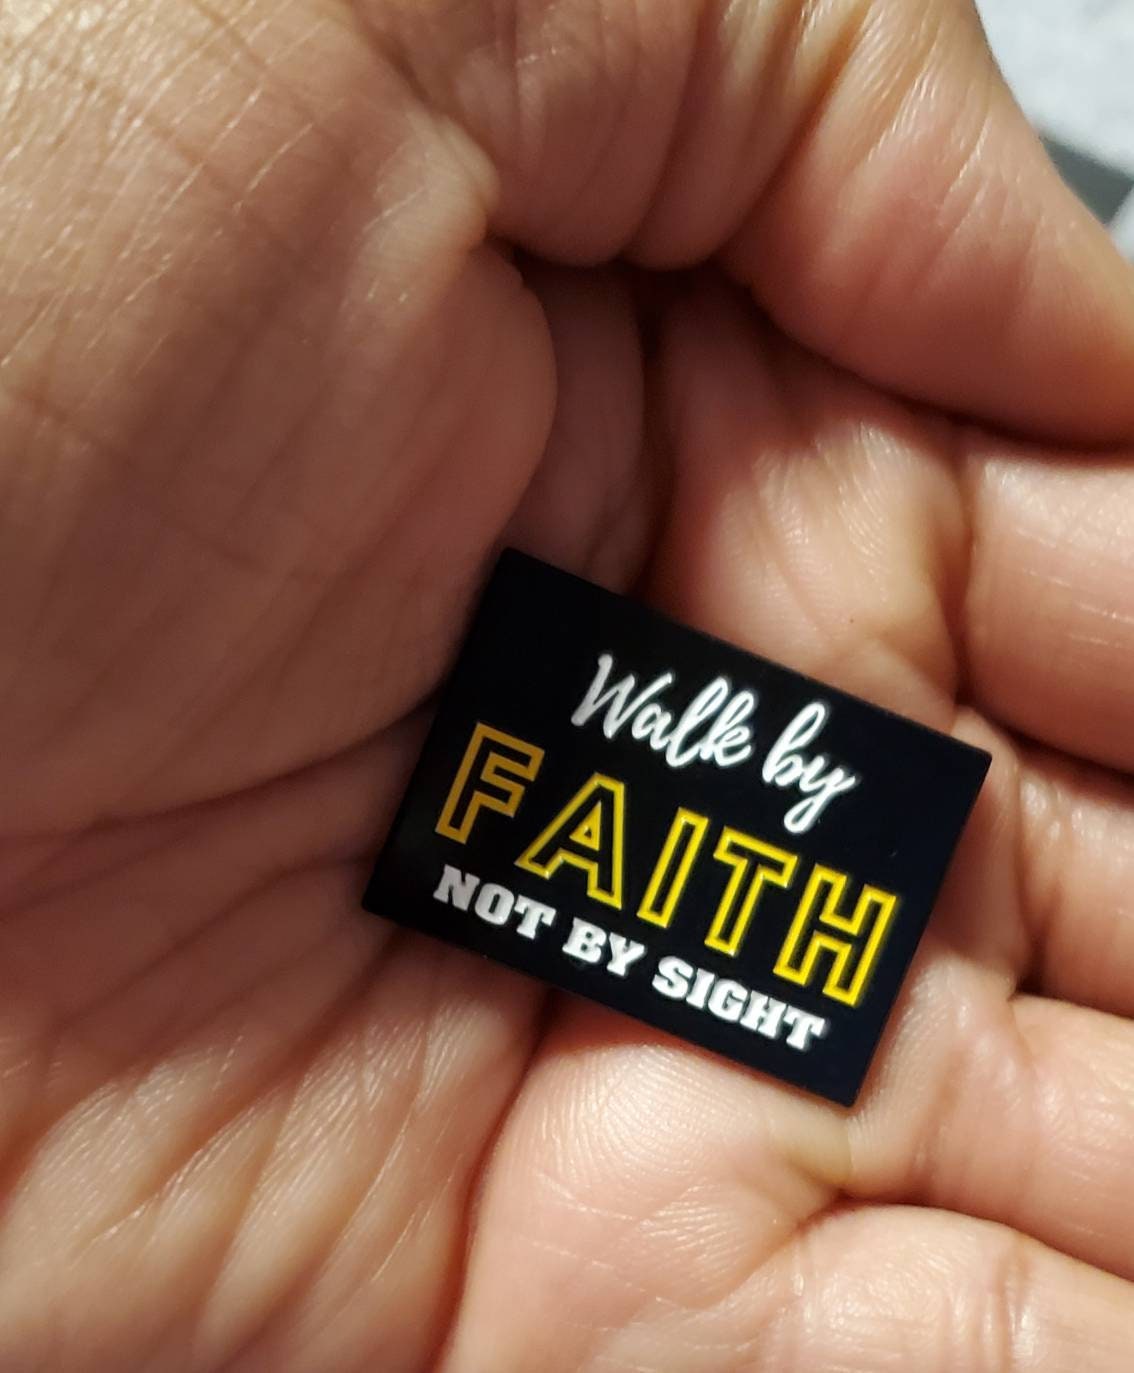 Enamel Pin, "Walk by Faith" Exclusive Lapel Pin, Size 1.5" w/Butterfly Clutch,Cool Pins, Spiritual Gifts, Gifts for Her, Jacket Pin